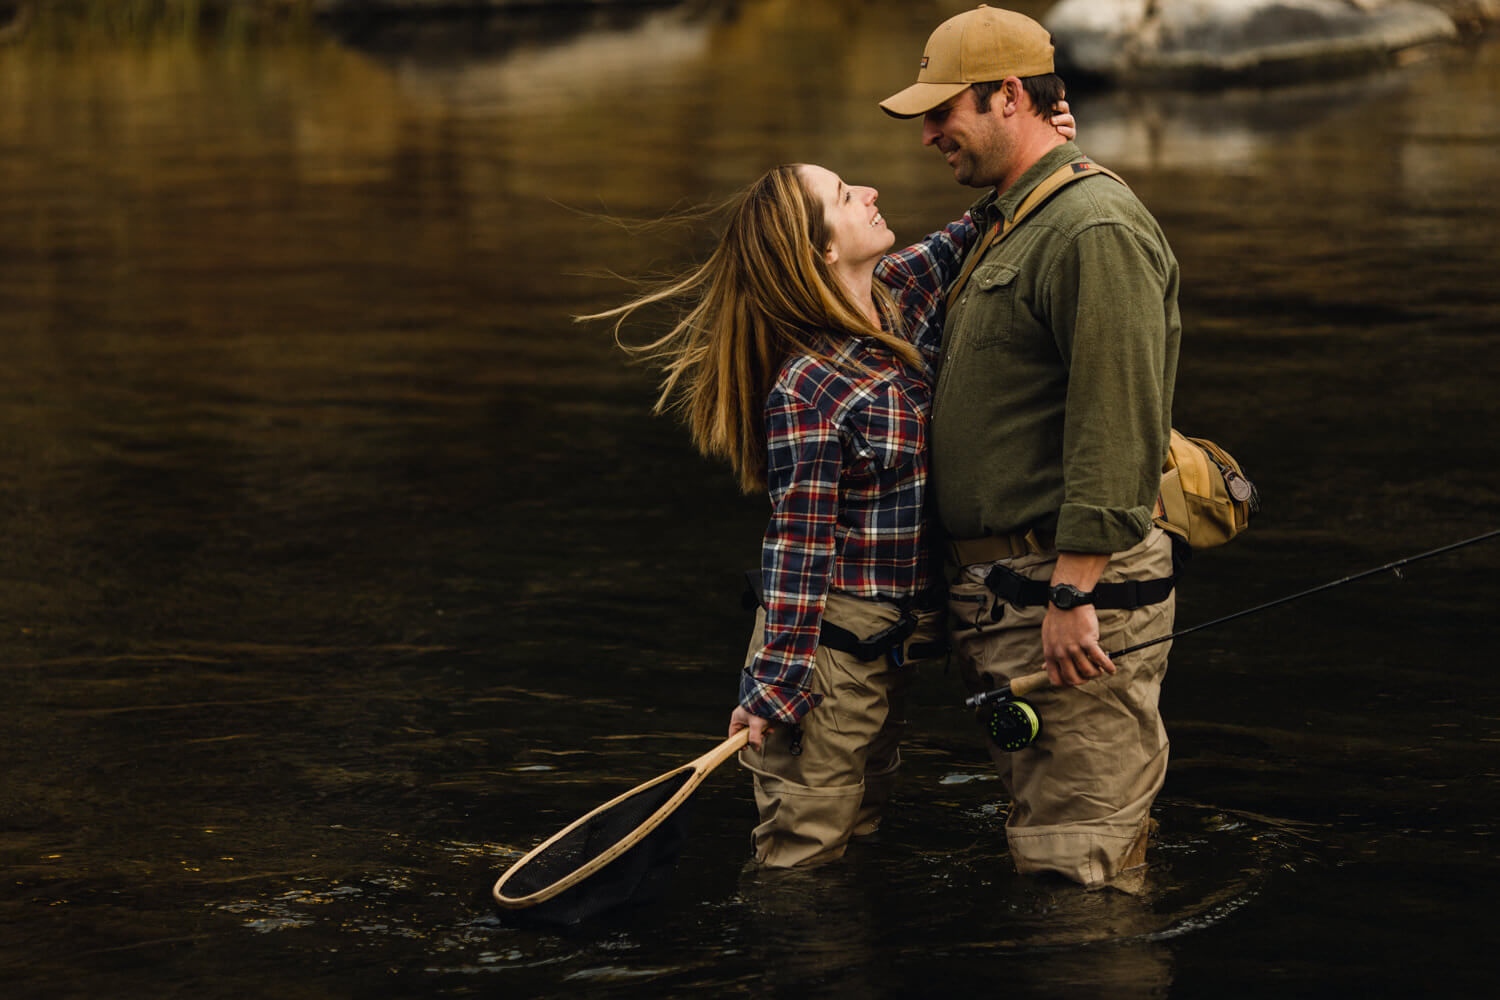 Fly fishing couple leans in for a kiss.